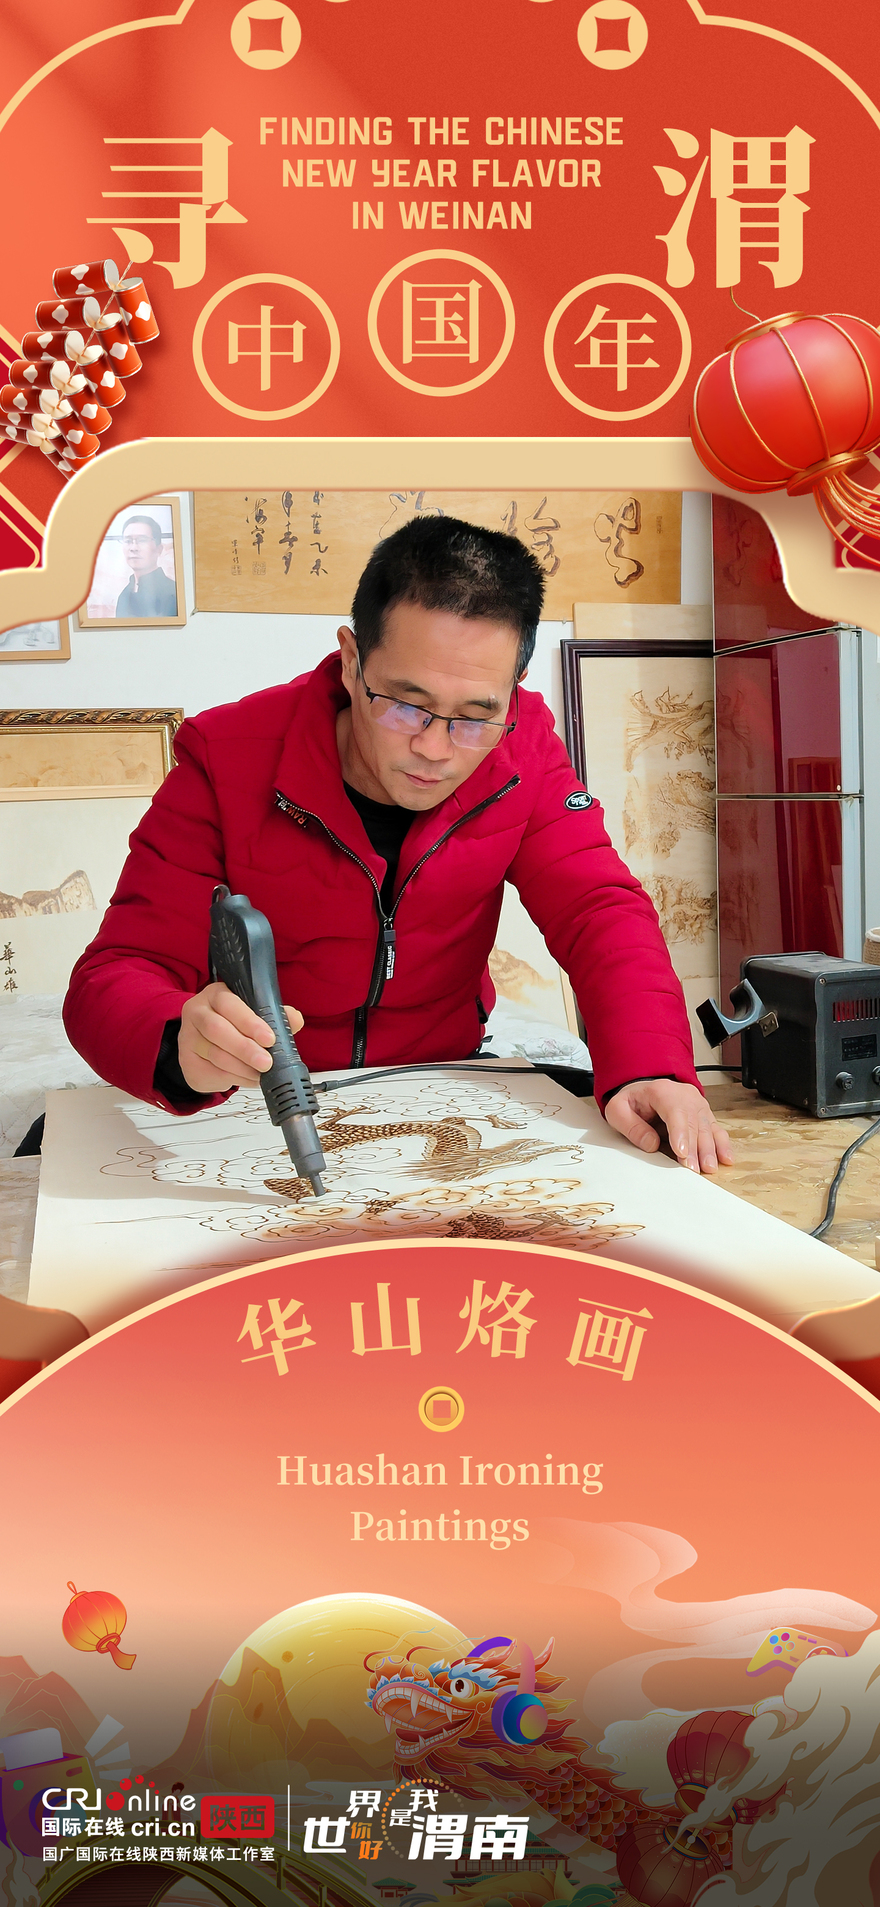 Finding the Chinese New Year Flavor in Weinan_fororder_微信图片_20240209111209